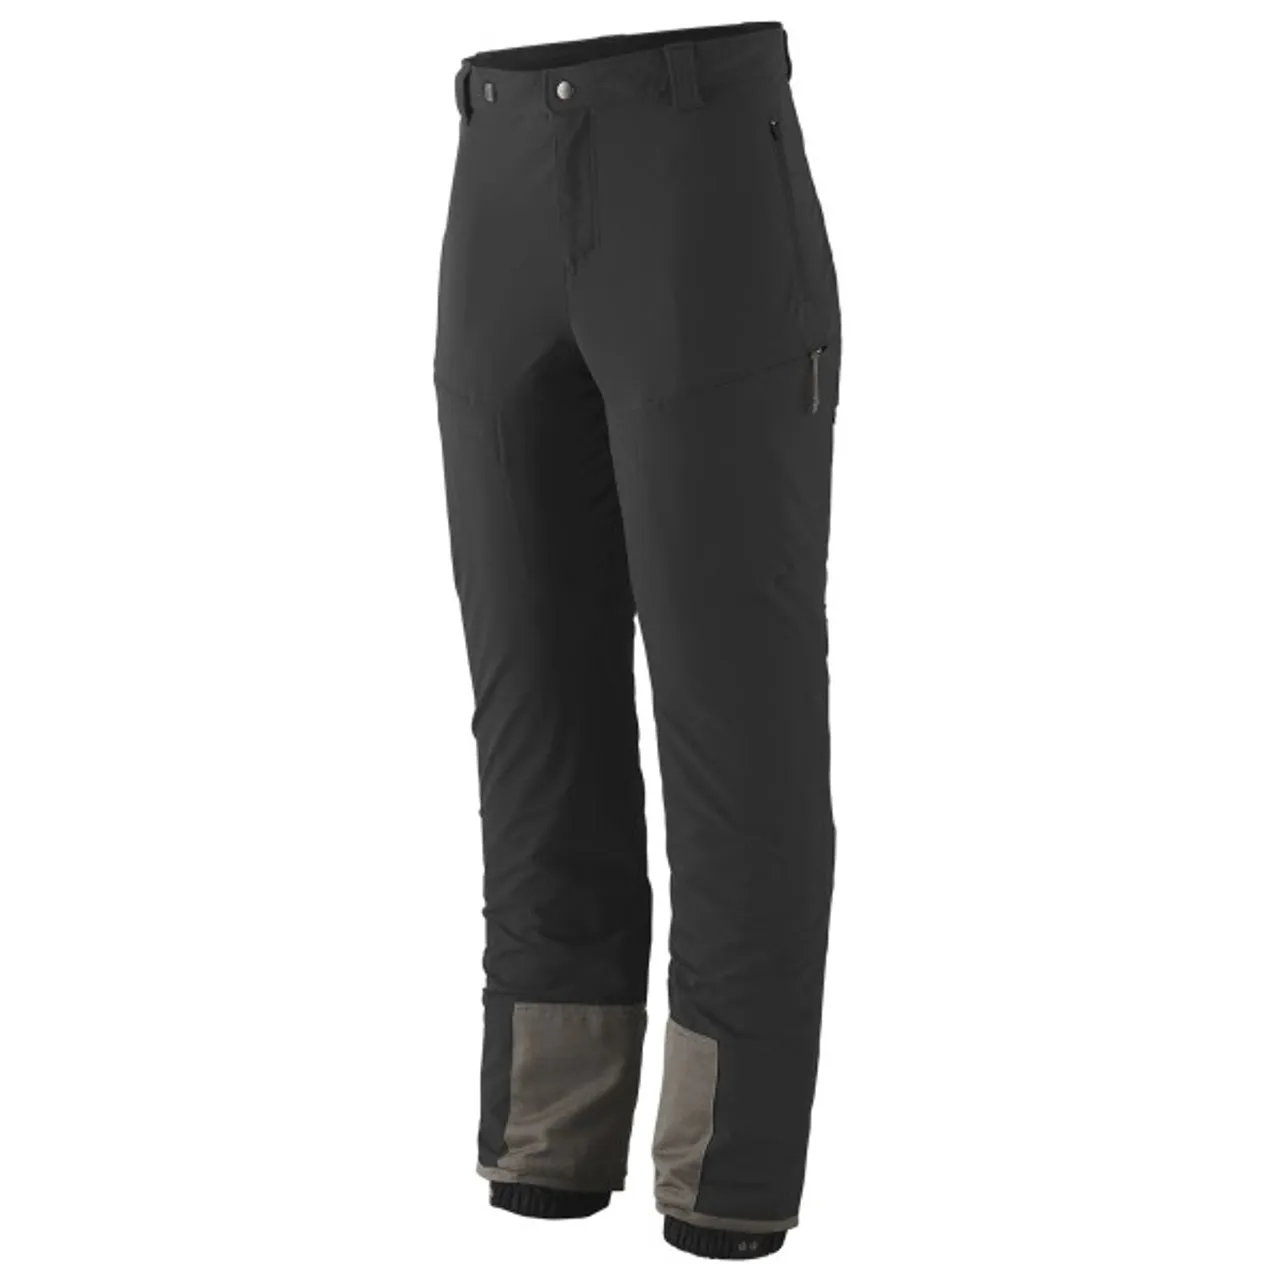 Patagonia - Women's Alpine Guide Pants - Softshell trousers